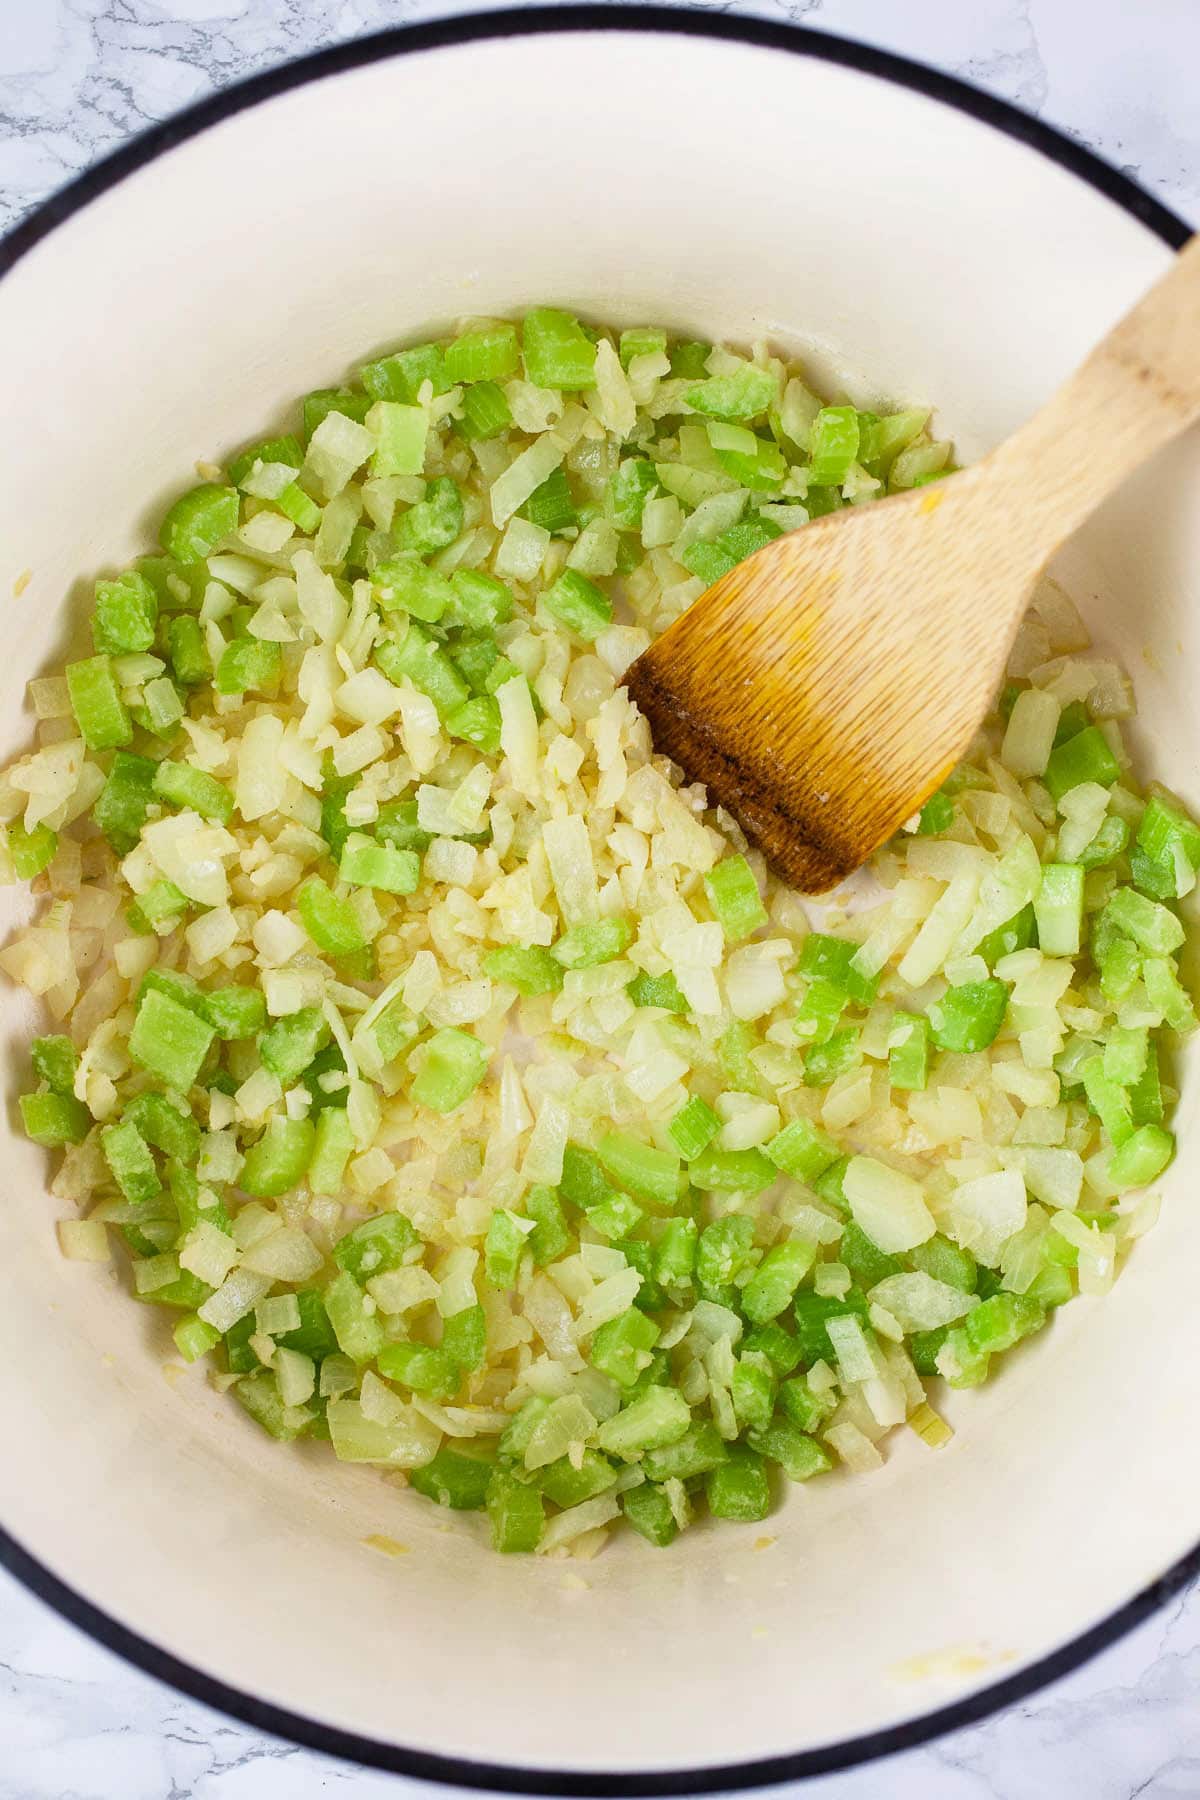 Garlic, onions, and celery sautéed with white wine in Dutch oven.